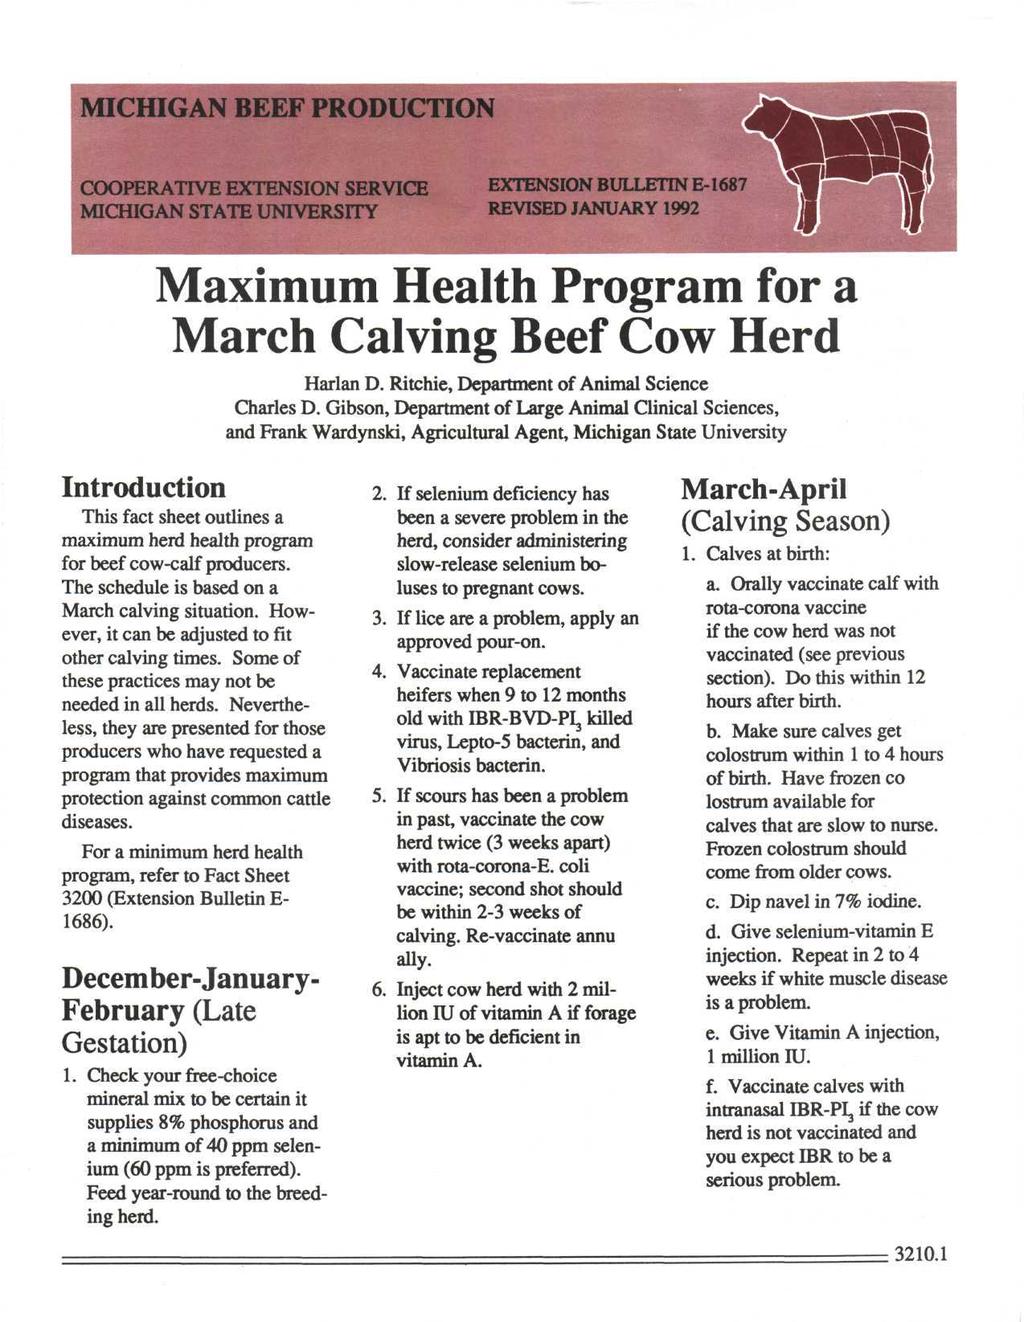 MICHIGAN BEEF PRODUCTION >ERATTVE EXTENSION SERVICE MICHIGAN STATE UNIVERSITY EXTENSION BULLETIN E-1687 REVISED JANUARY 1992 Maximum Health Program for a March Calving Beef Cow Herd Harlan D.